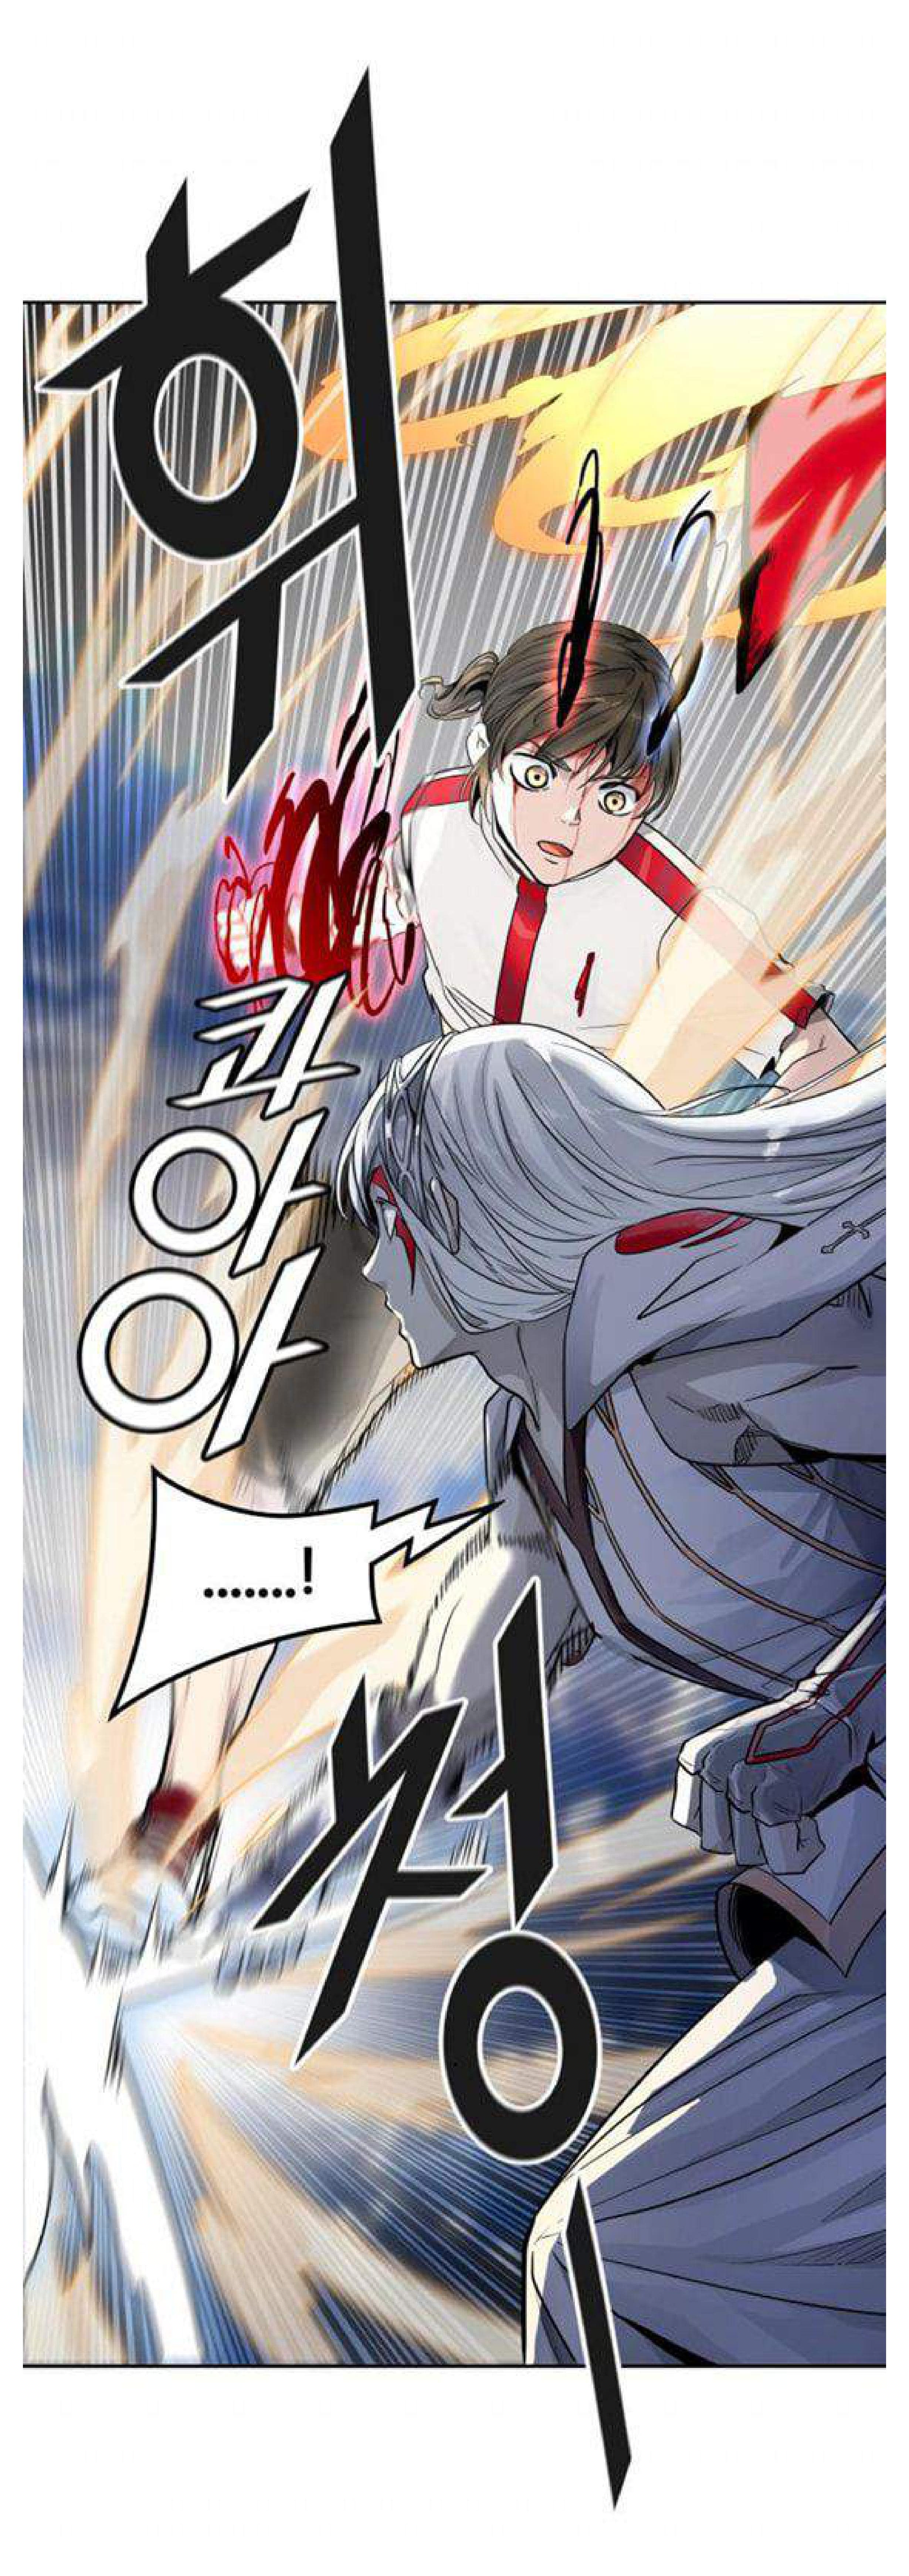 tower of god 504, tower of god 504, Read tower of god 504, tower of god 504 Manga, tower of god 504 english, tower of god 504 raw manga, tower of god 504 online, tower of god 504 high quality, tower of god 504 chapter, tower of god 504 manga scan